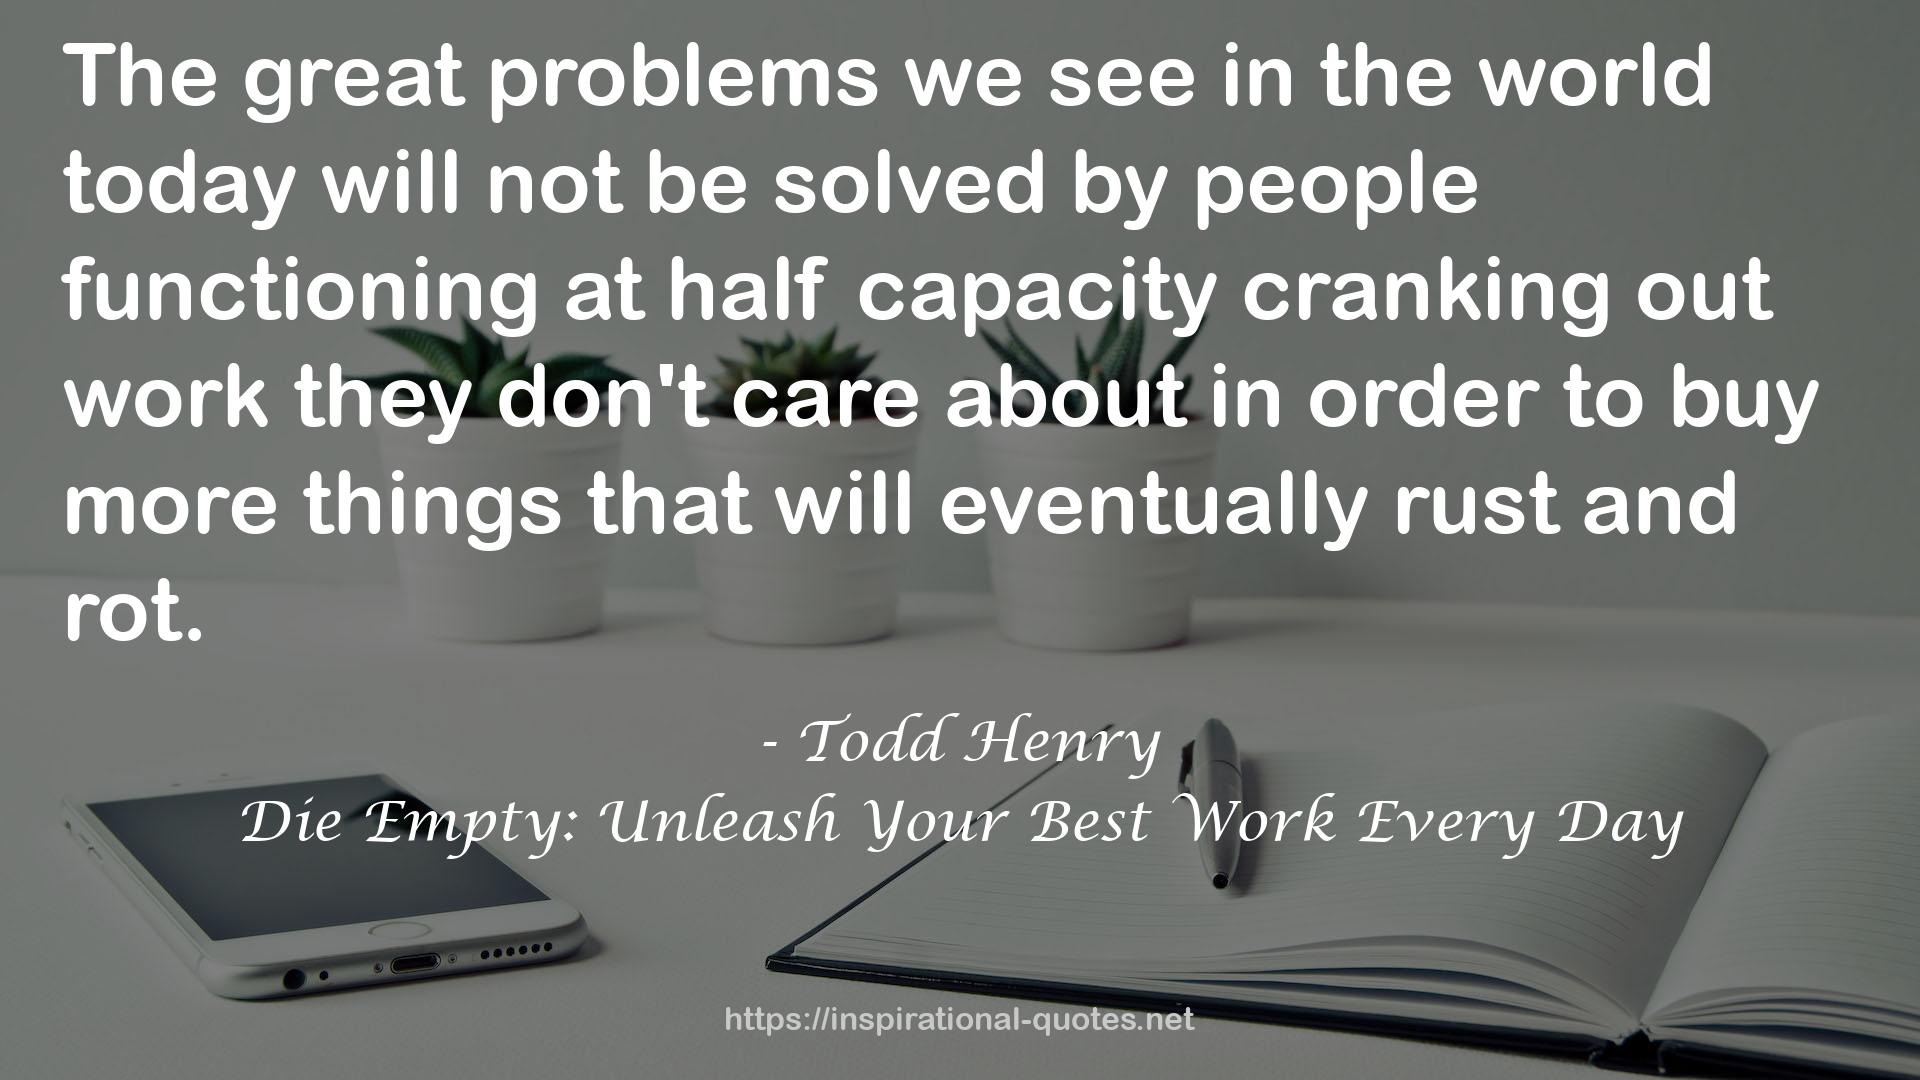 Todd Henry QUOTES